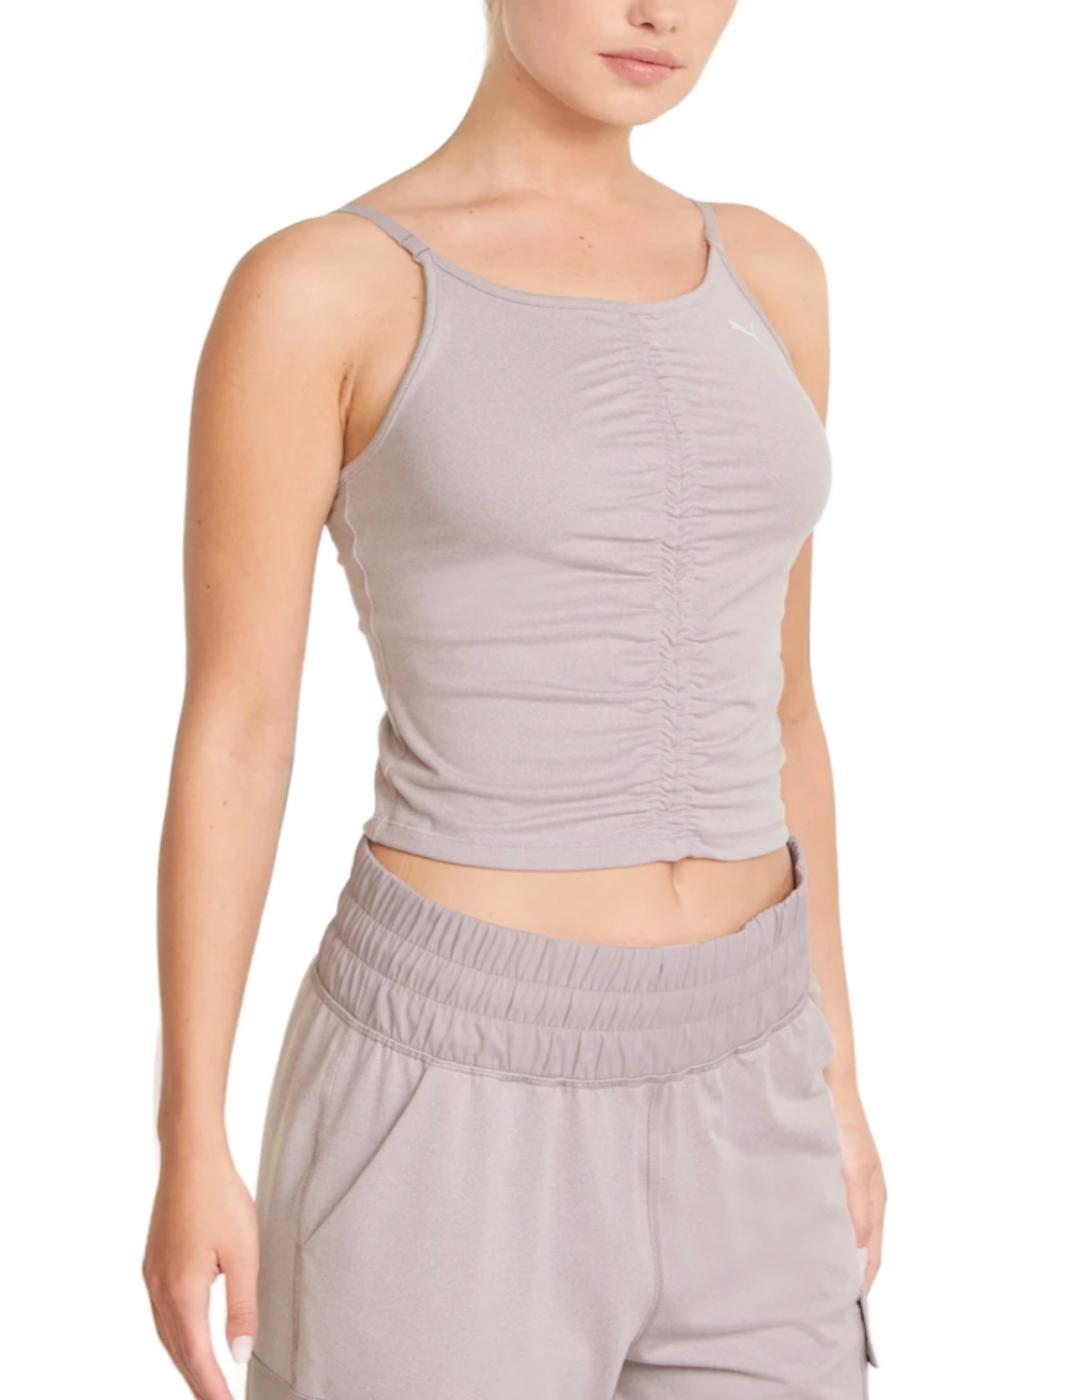 Top deporte Puma ruched lila para mujer -a